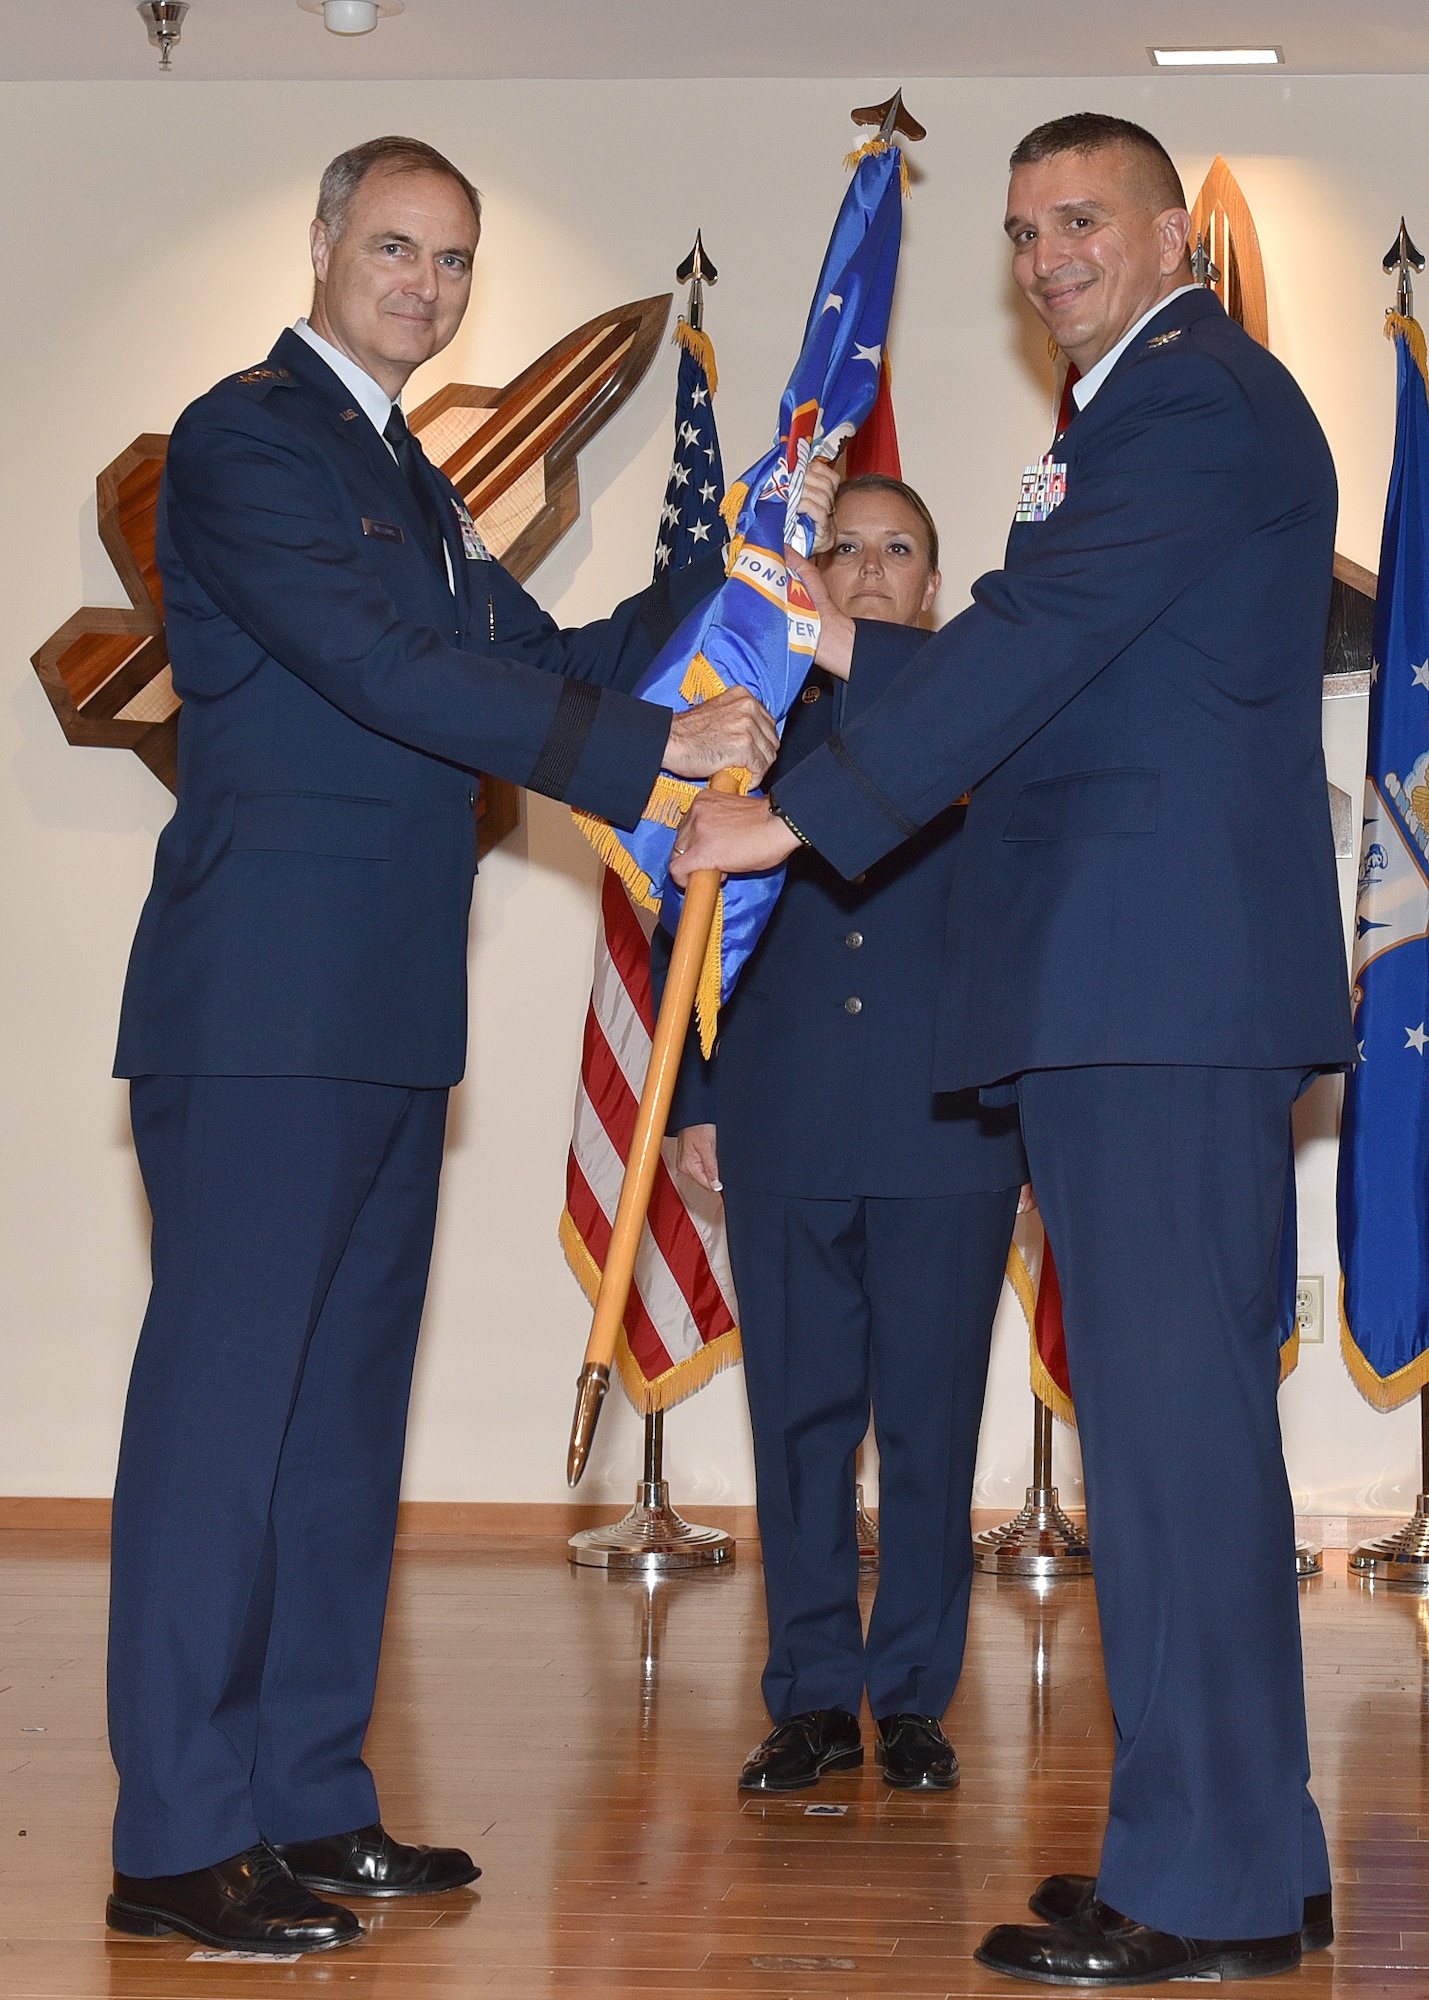 Col. Michael Valle, 101st Air and Space Operations Group commander, takes the ceremonial flag from Lt. Gen. R. Scott Williams, Continental U.S. NORAD Region – First Air Force (Air Forces Northern) commander, during the 601st Air Operations Center change of command ceremony at Tyndall Air Force Base, Florida on April 13, 2018.